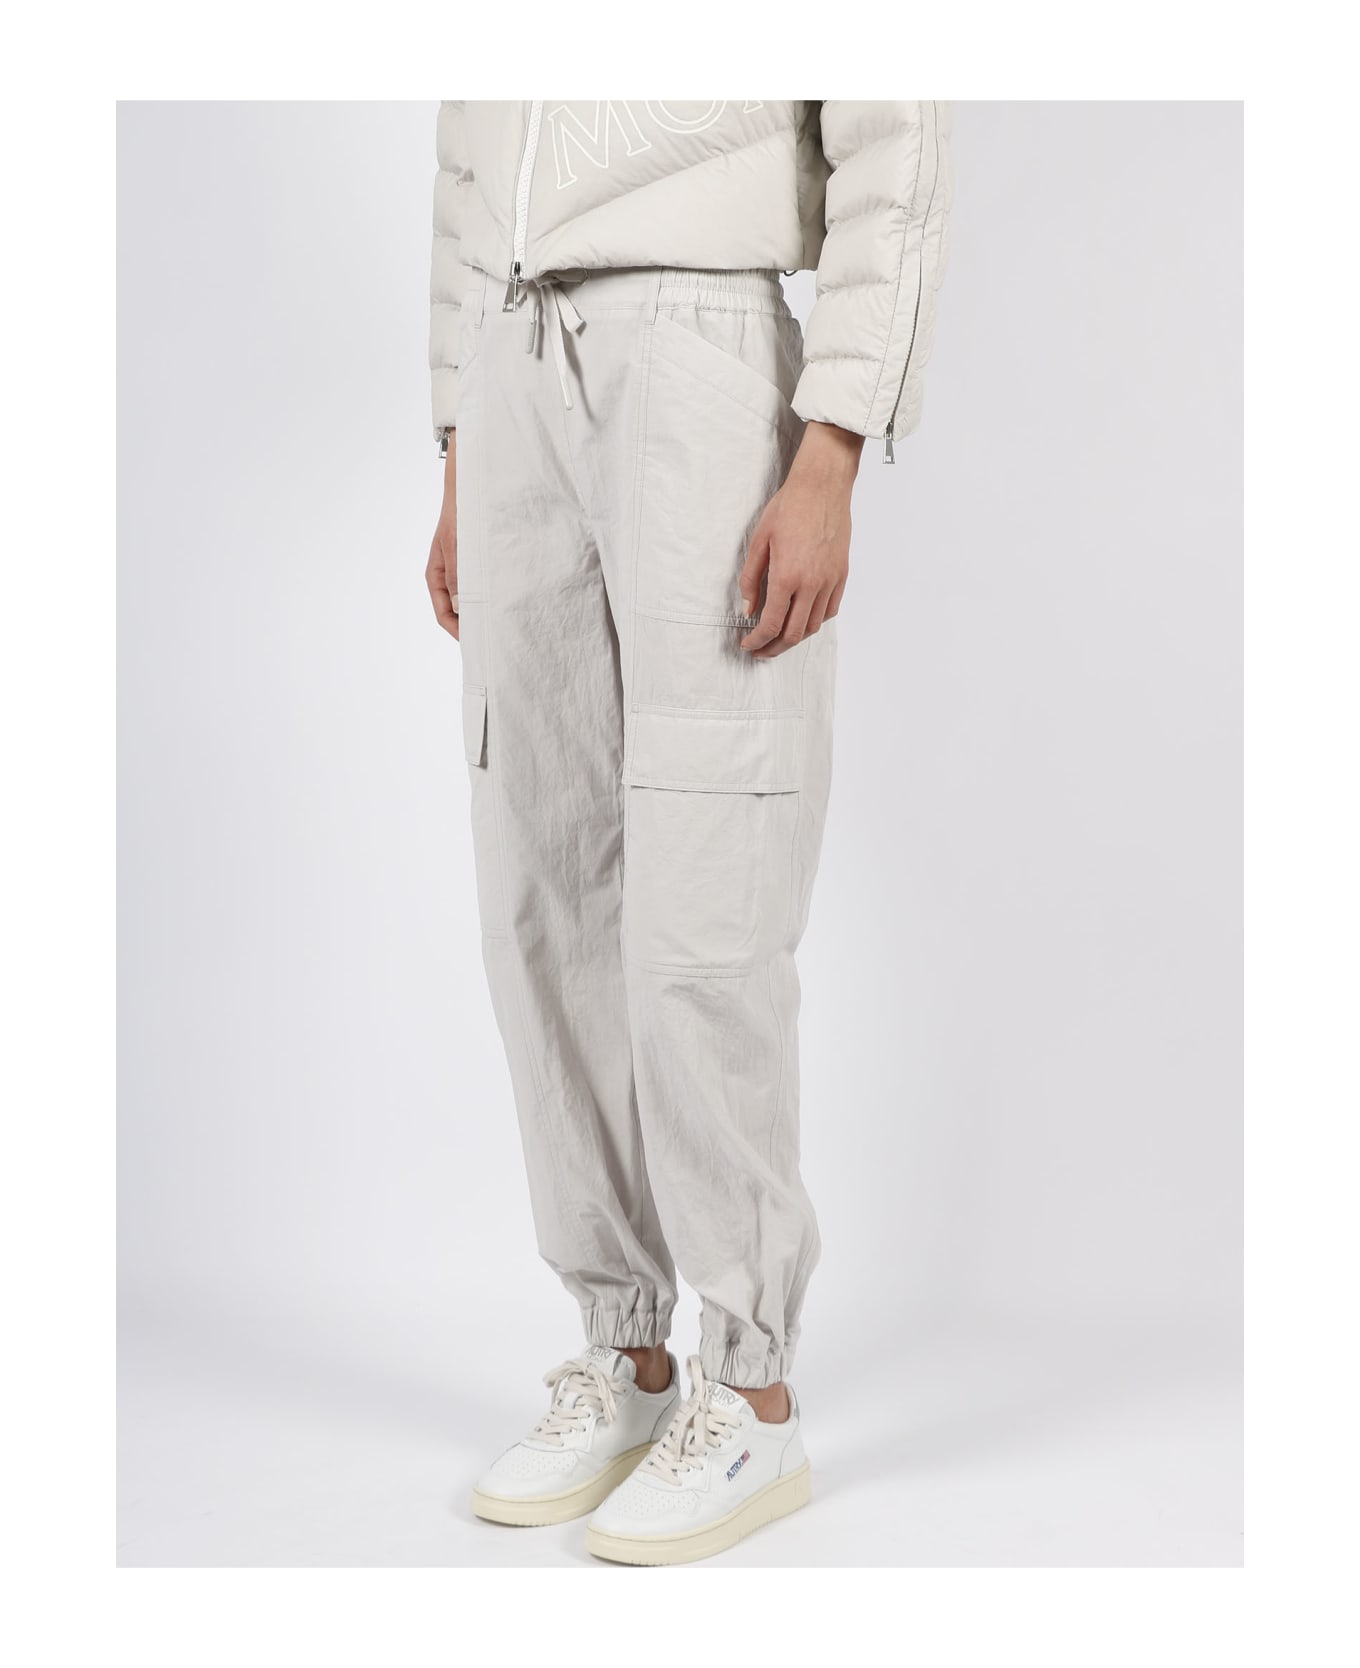 Moncler Cotton Trousers With Large Pockets - Grey